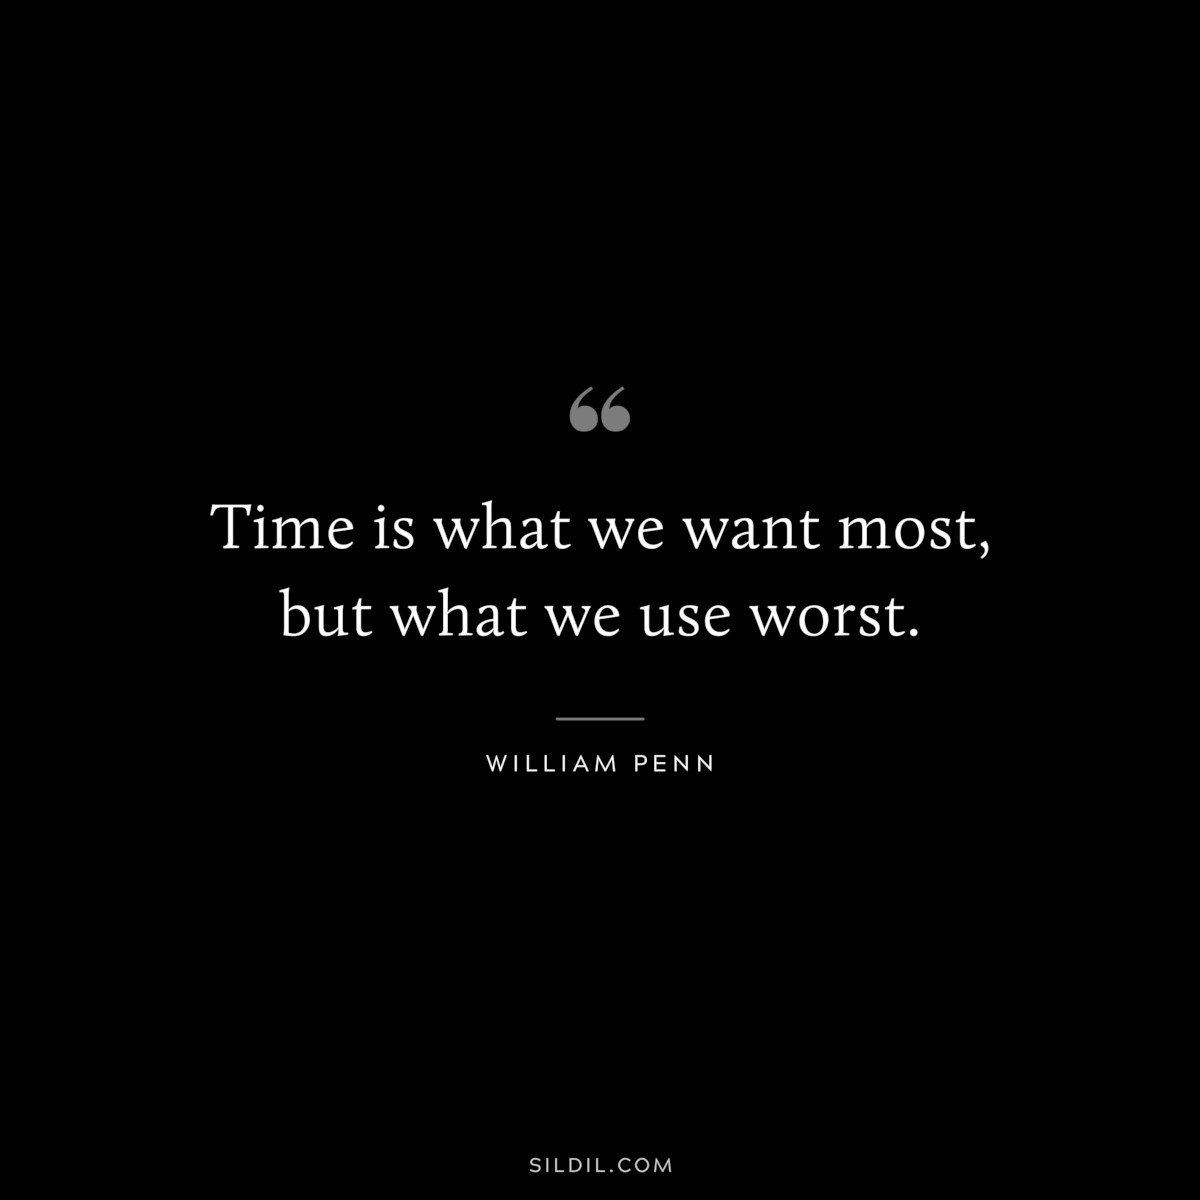 Time is what we want most, but what we use worst. ― William Penn